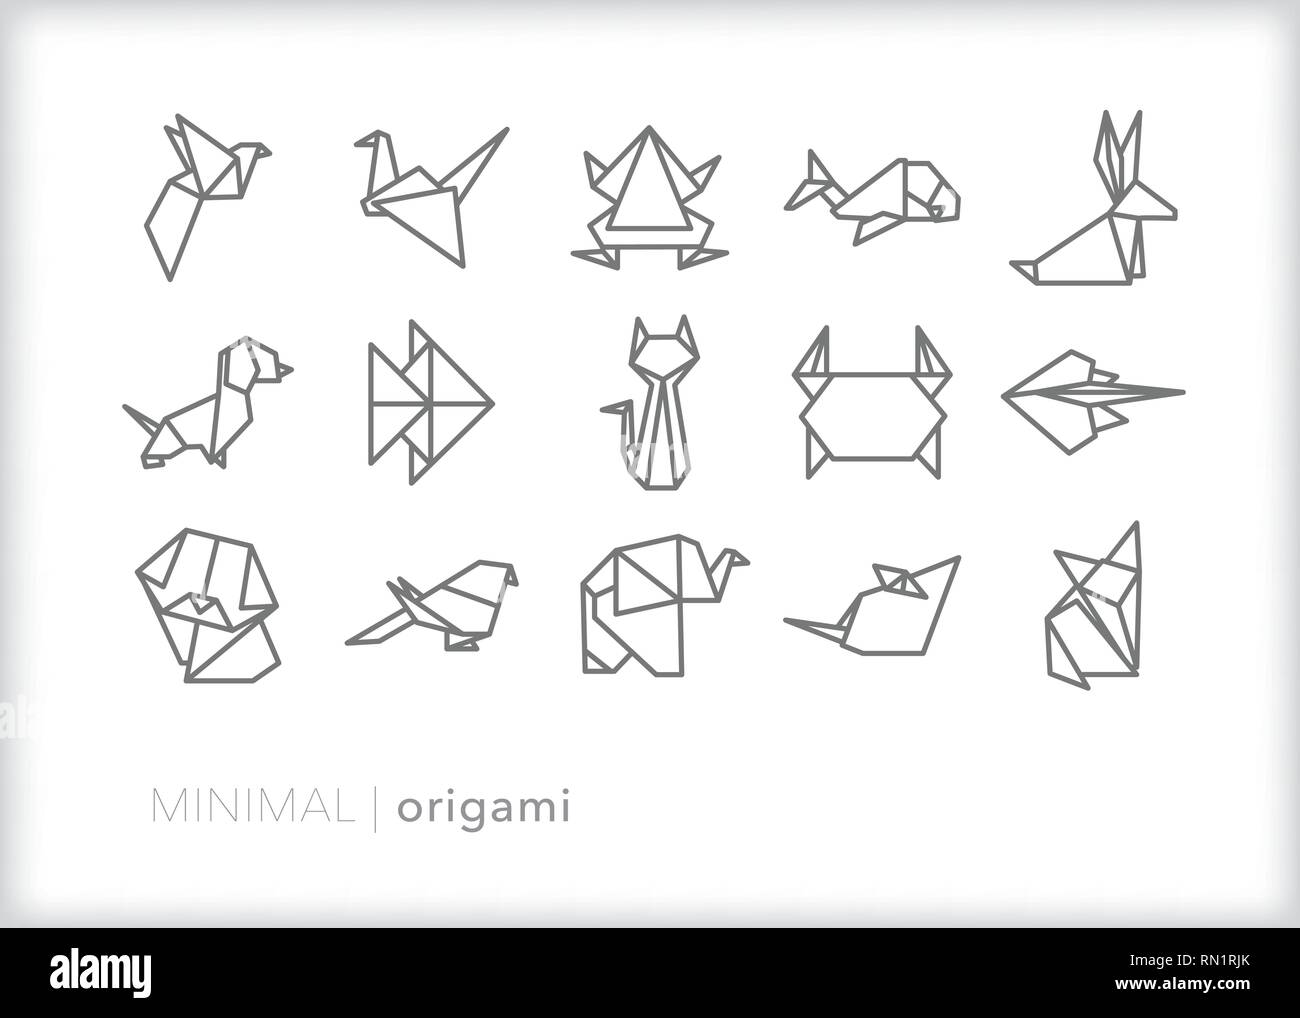 Set of 15 gray animal origami icons showing various mammals, birds and creatures as folded paper art Stock Vector